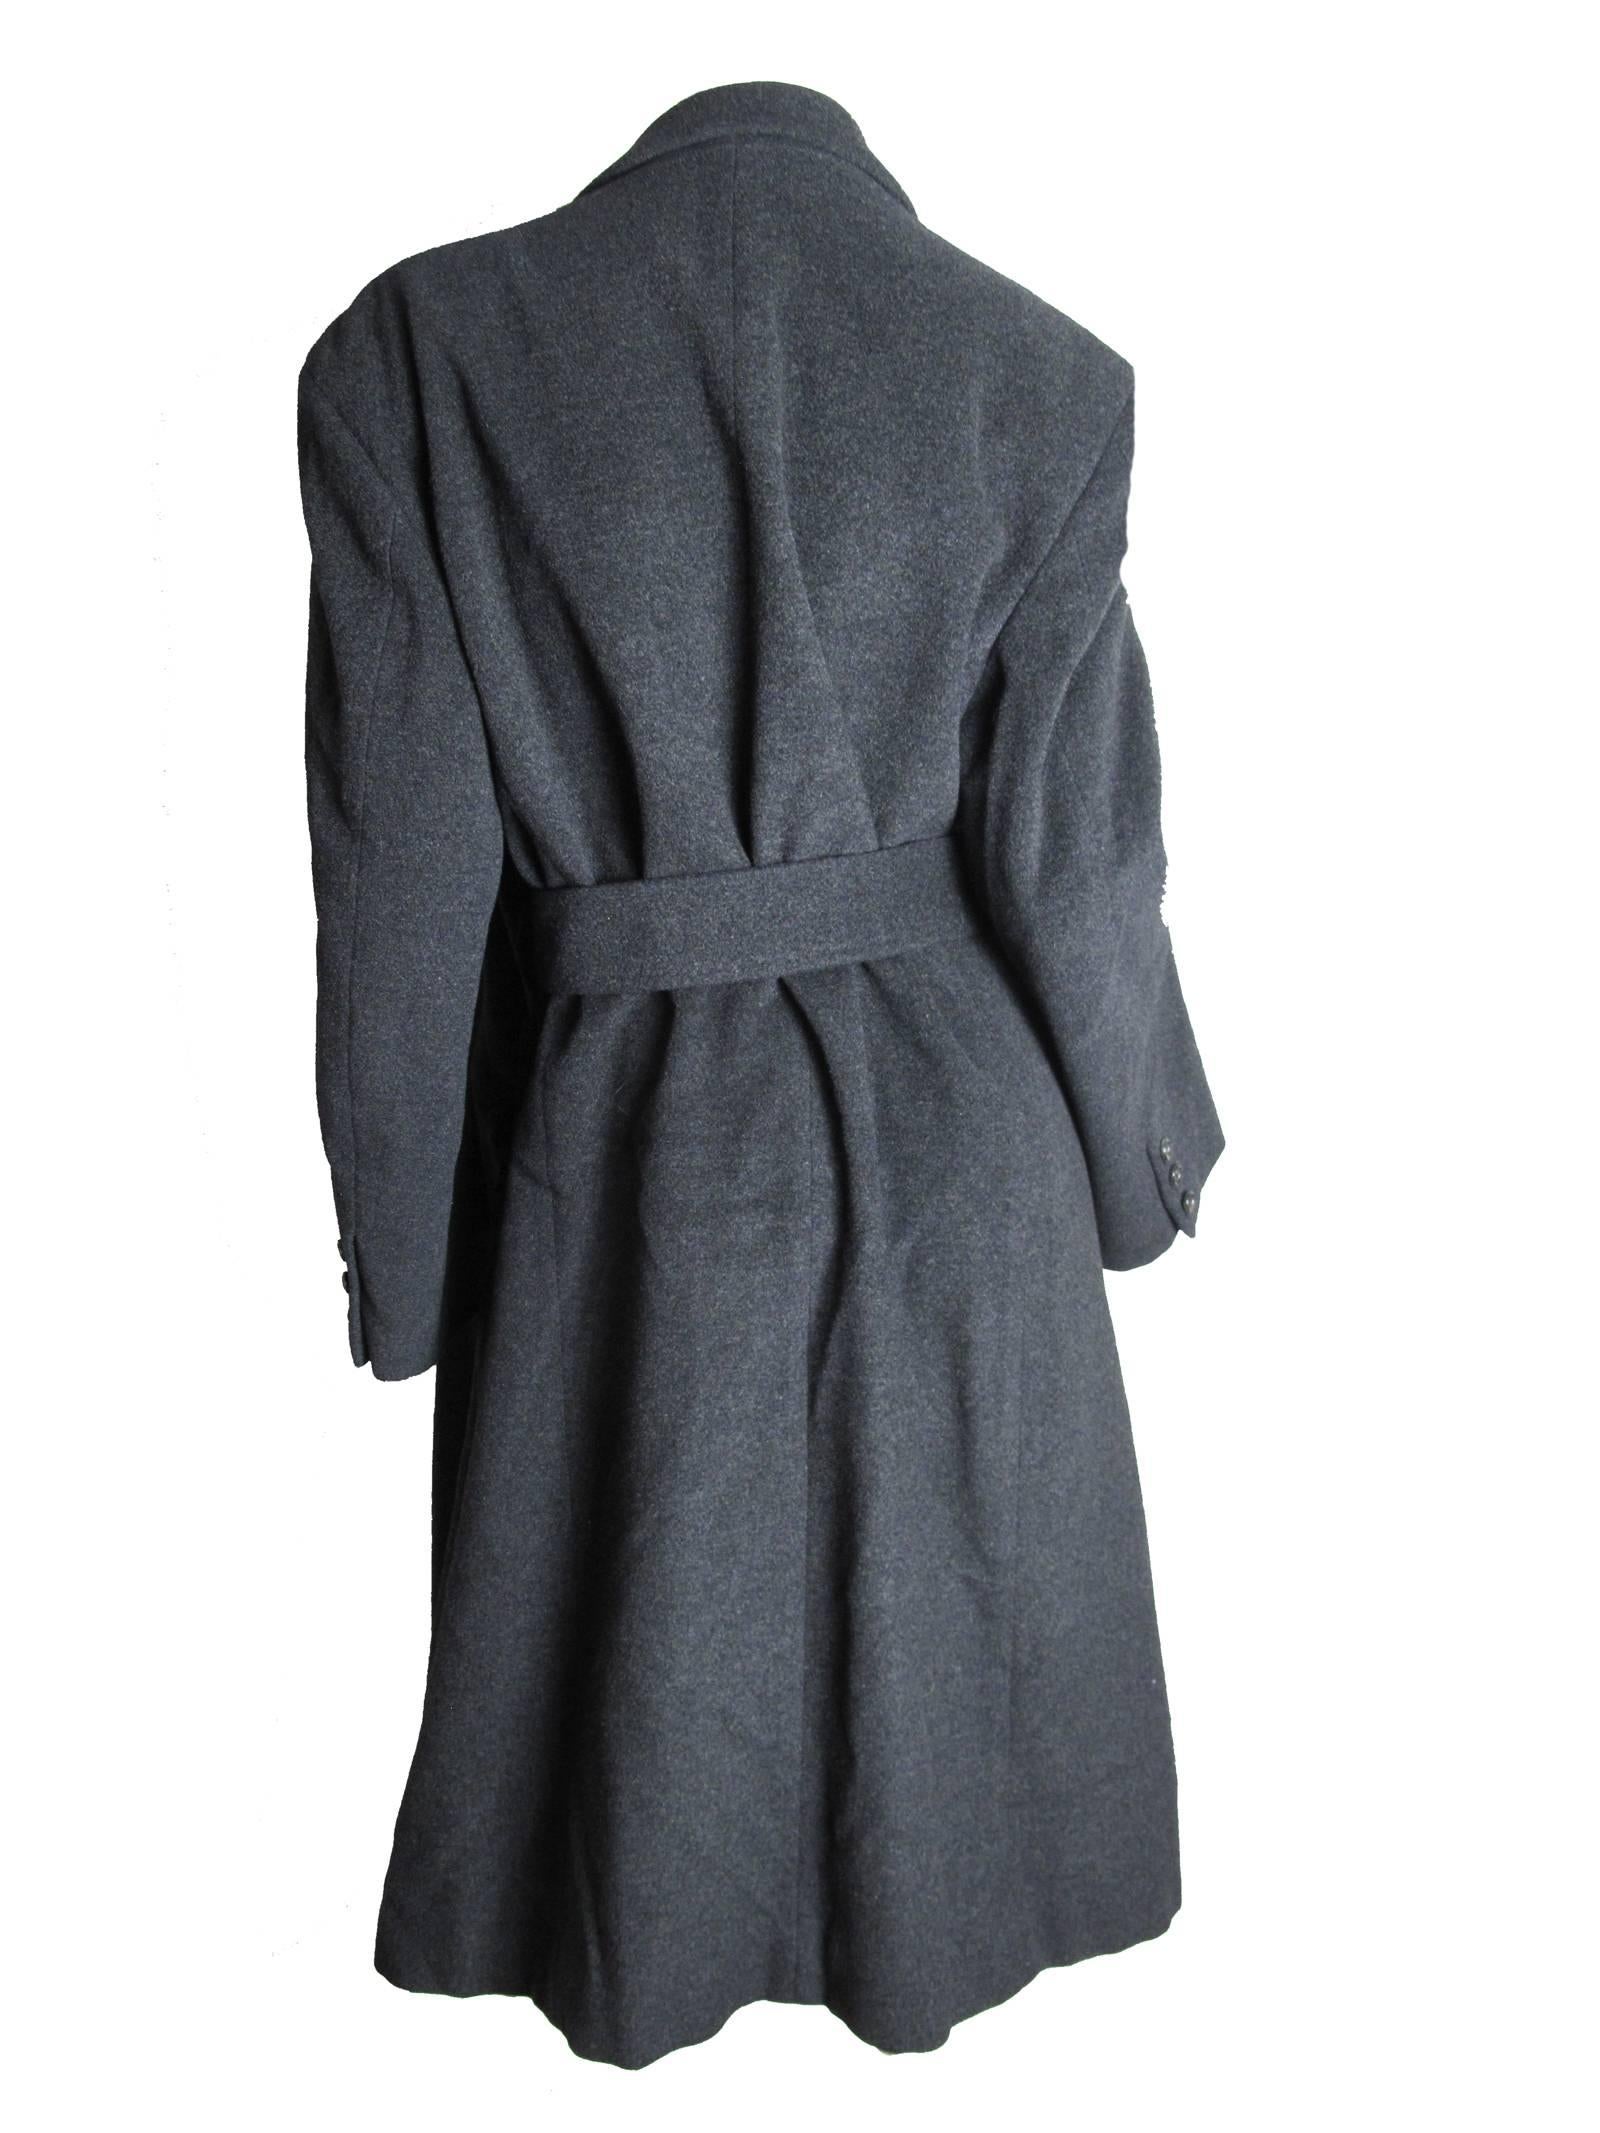 Comme des Garcons grey wool coat with belt.  Condition: Good, some tears to interior lining.  Size M 
